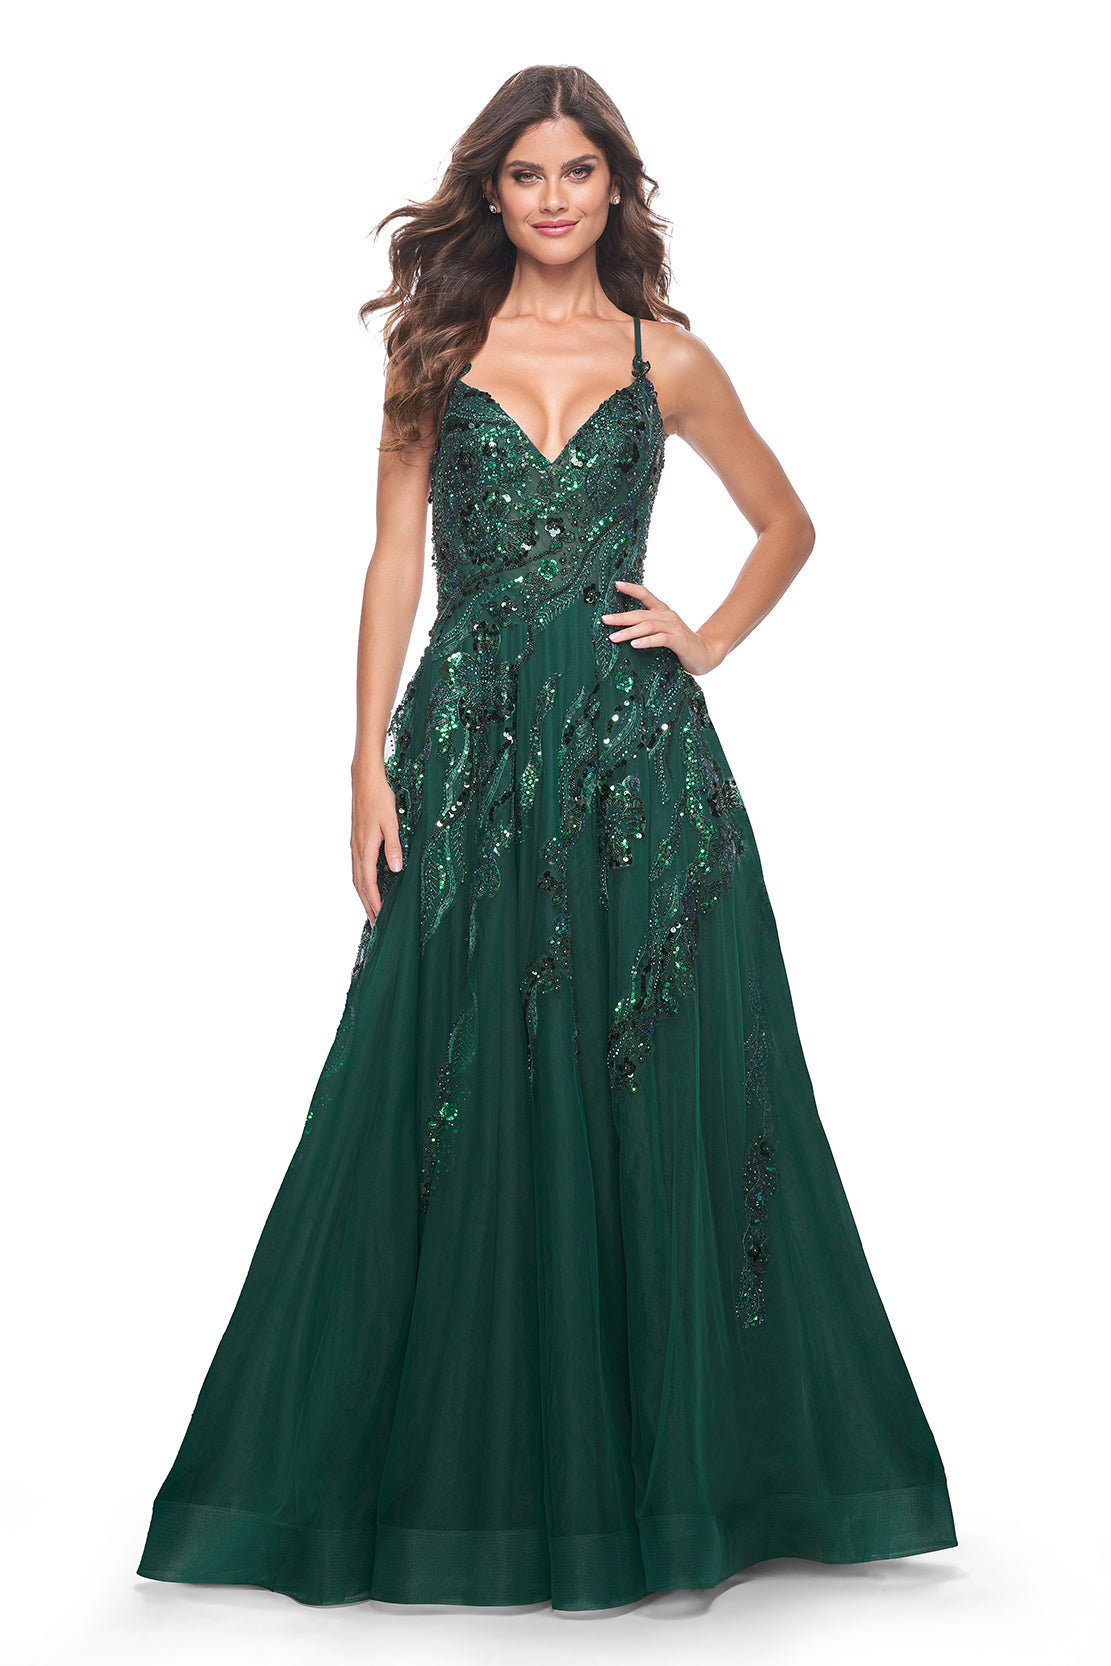 La Femme 32346 - An A-line prom gown with jewel-toned sequin applique, perfect for a captivating and glamorous look at prom or evening events.